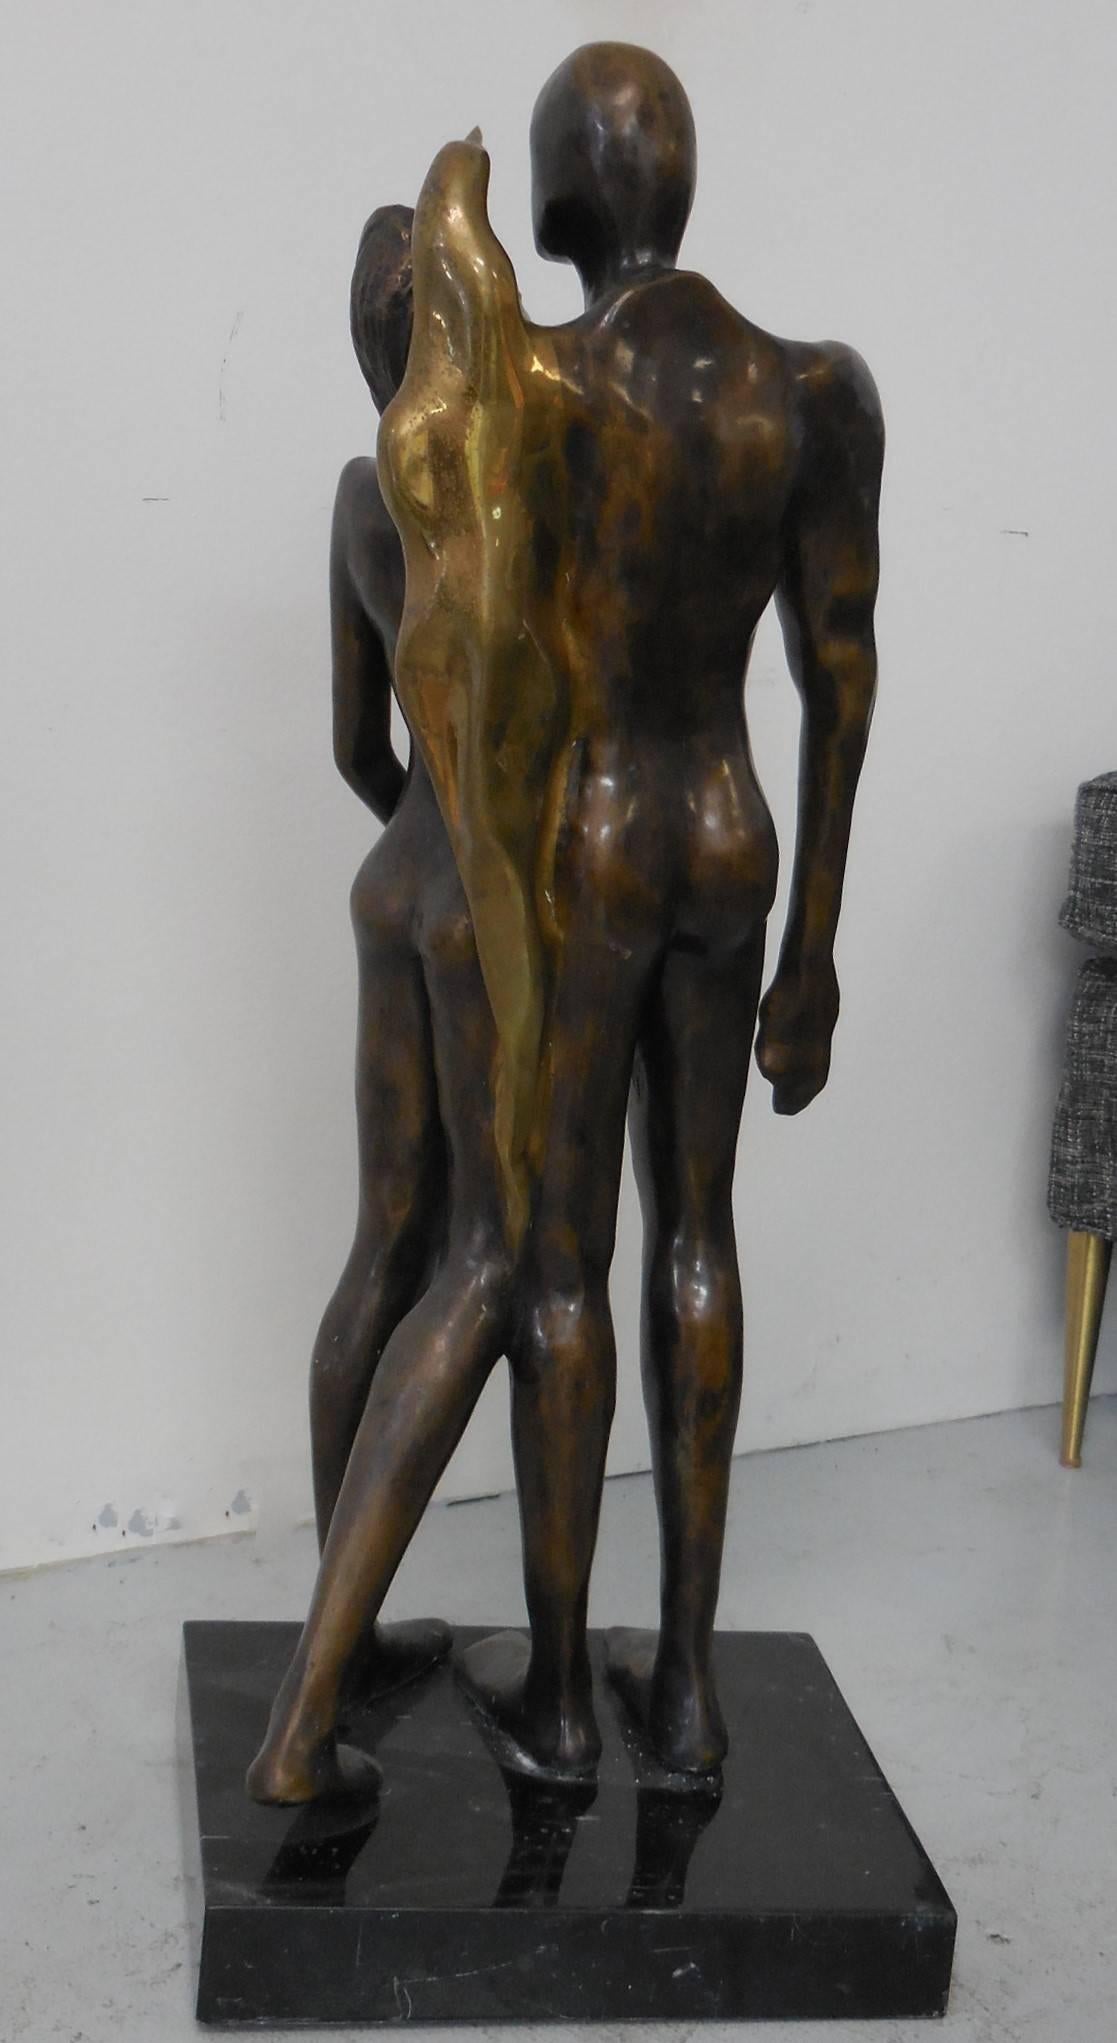 A large bronze sculpture with figures done in an stylized abstract manner. On a thick marble base. Signed illegible, dated '86, numbered 3/7.